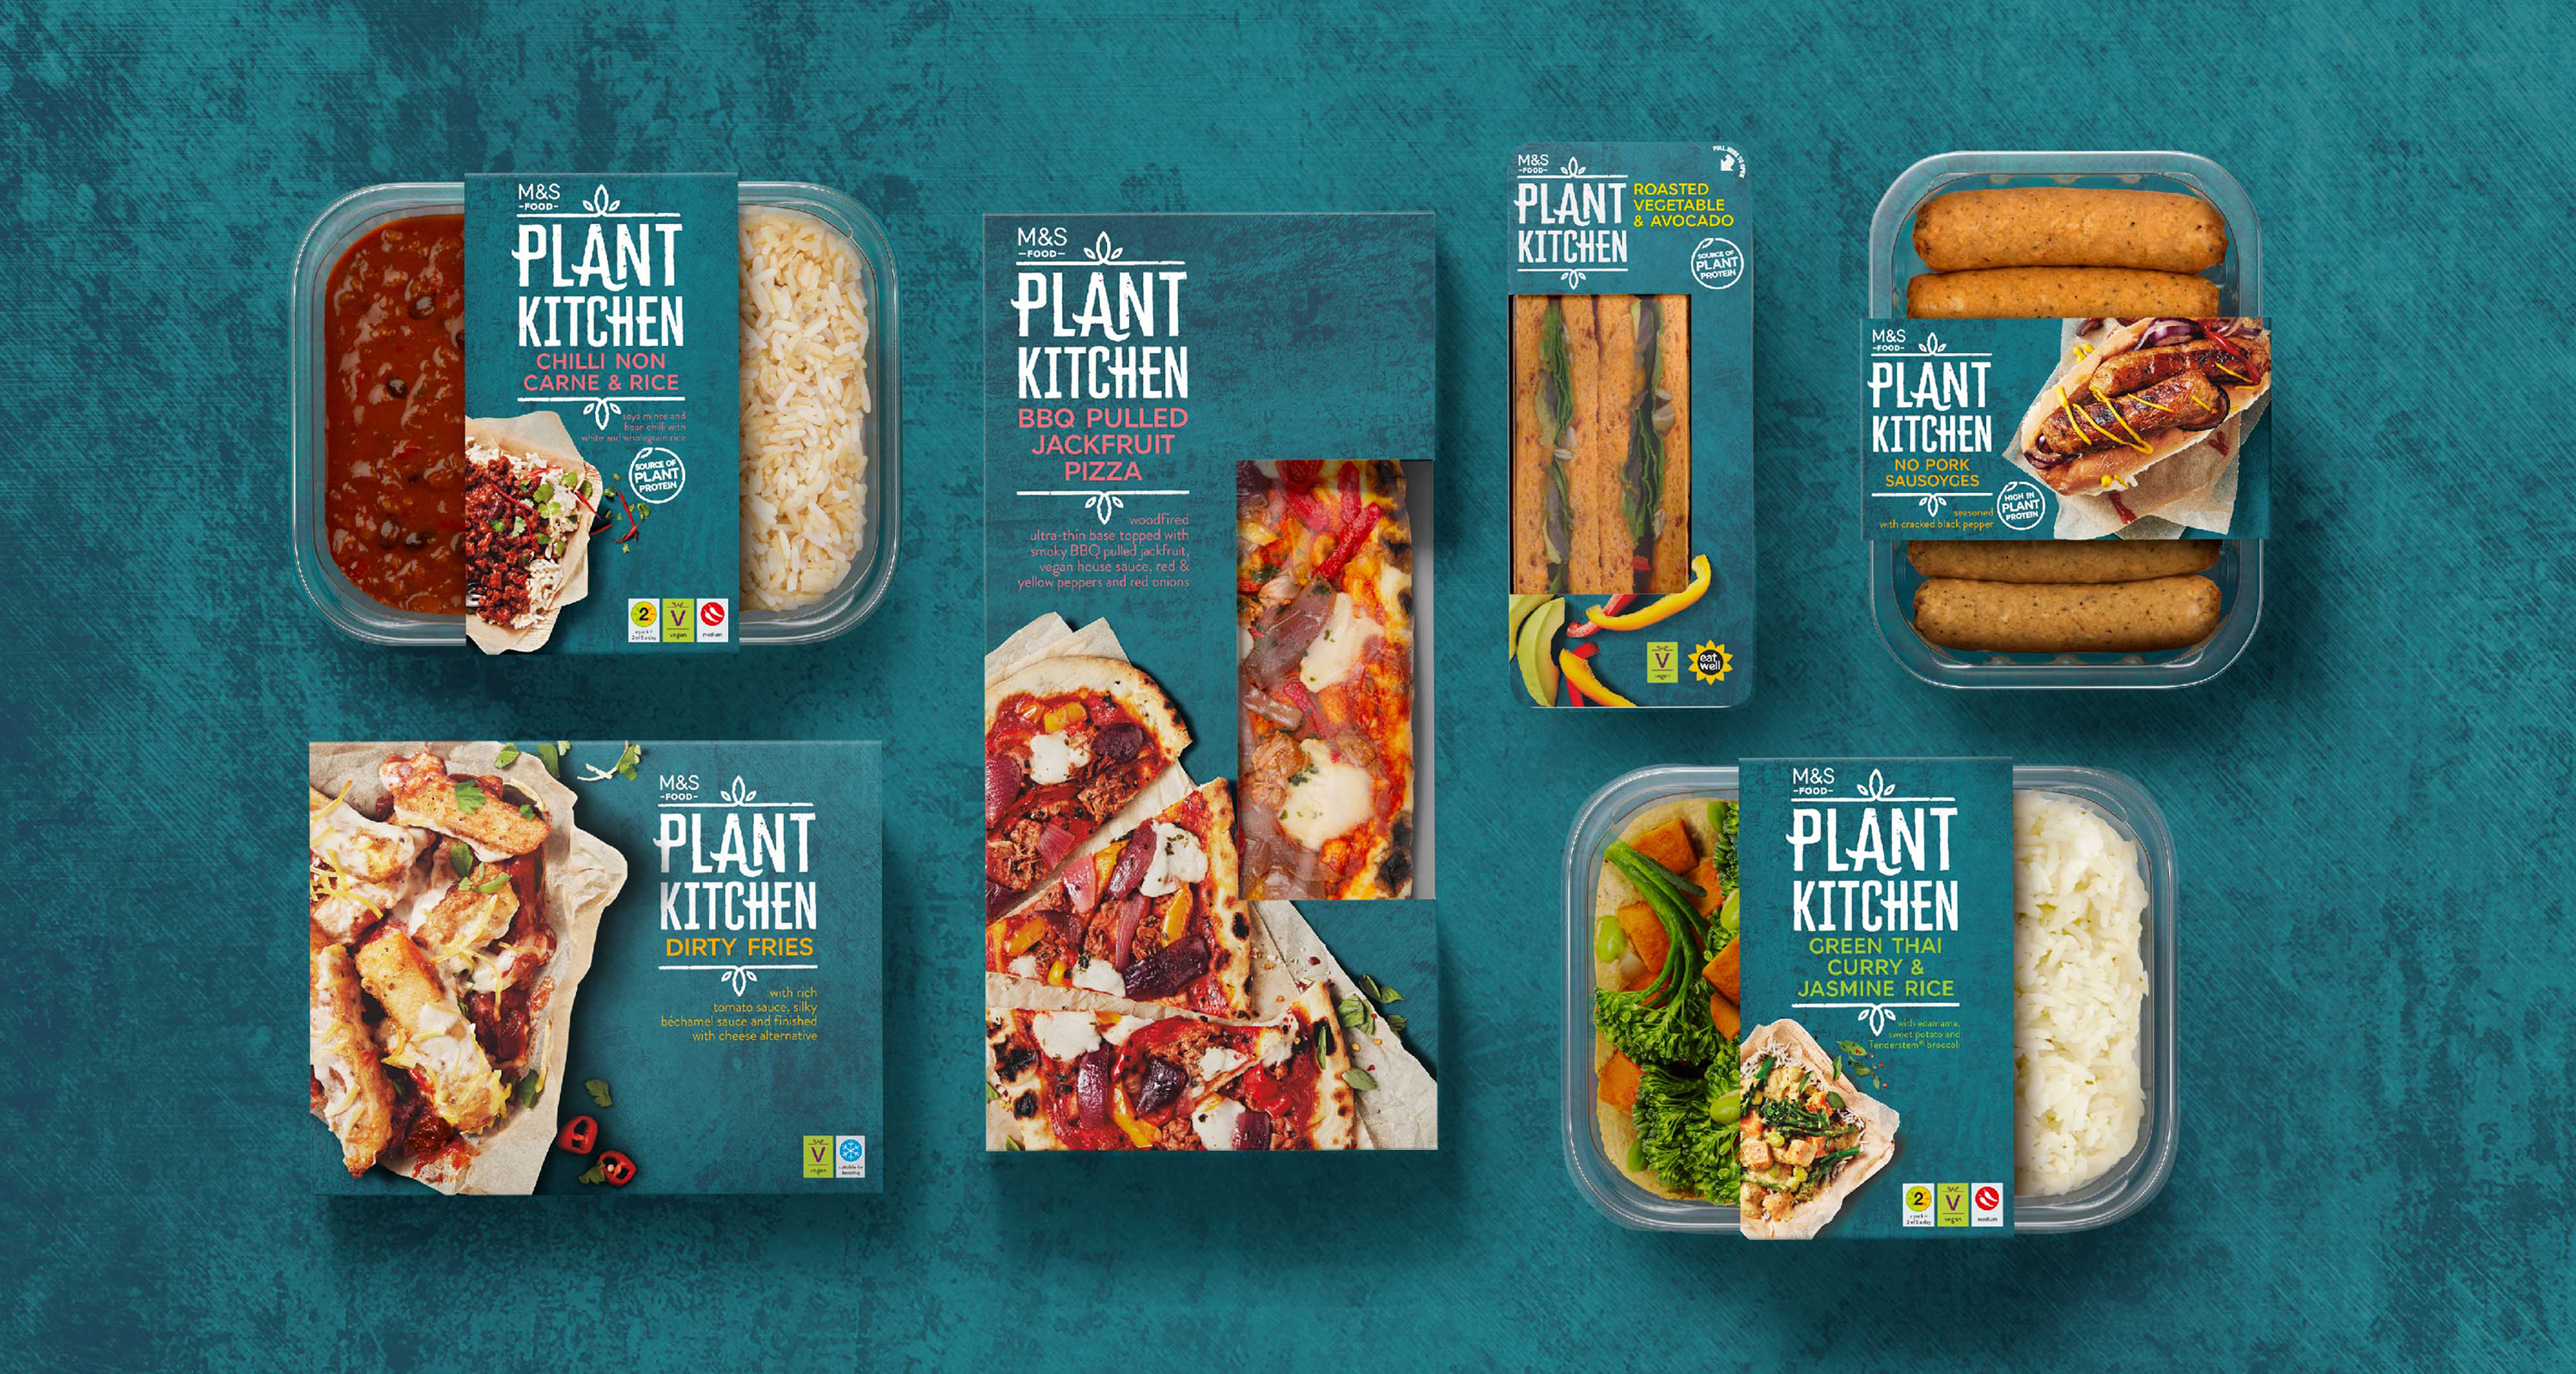 marks and spencer plant kitchen packaging